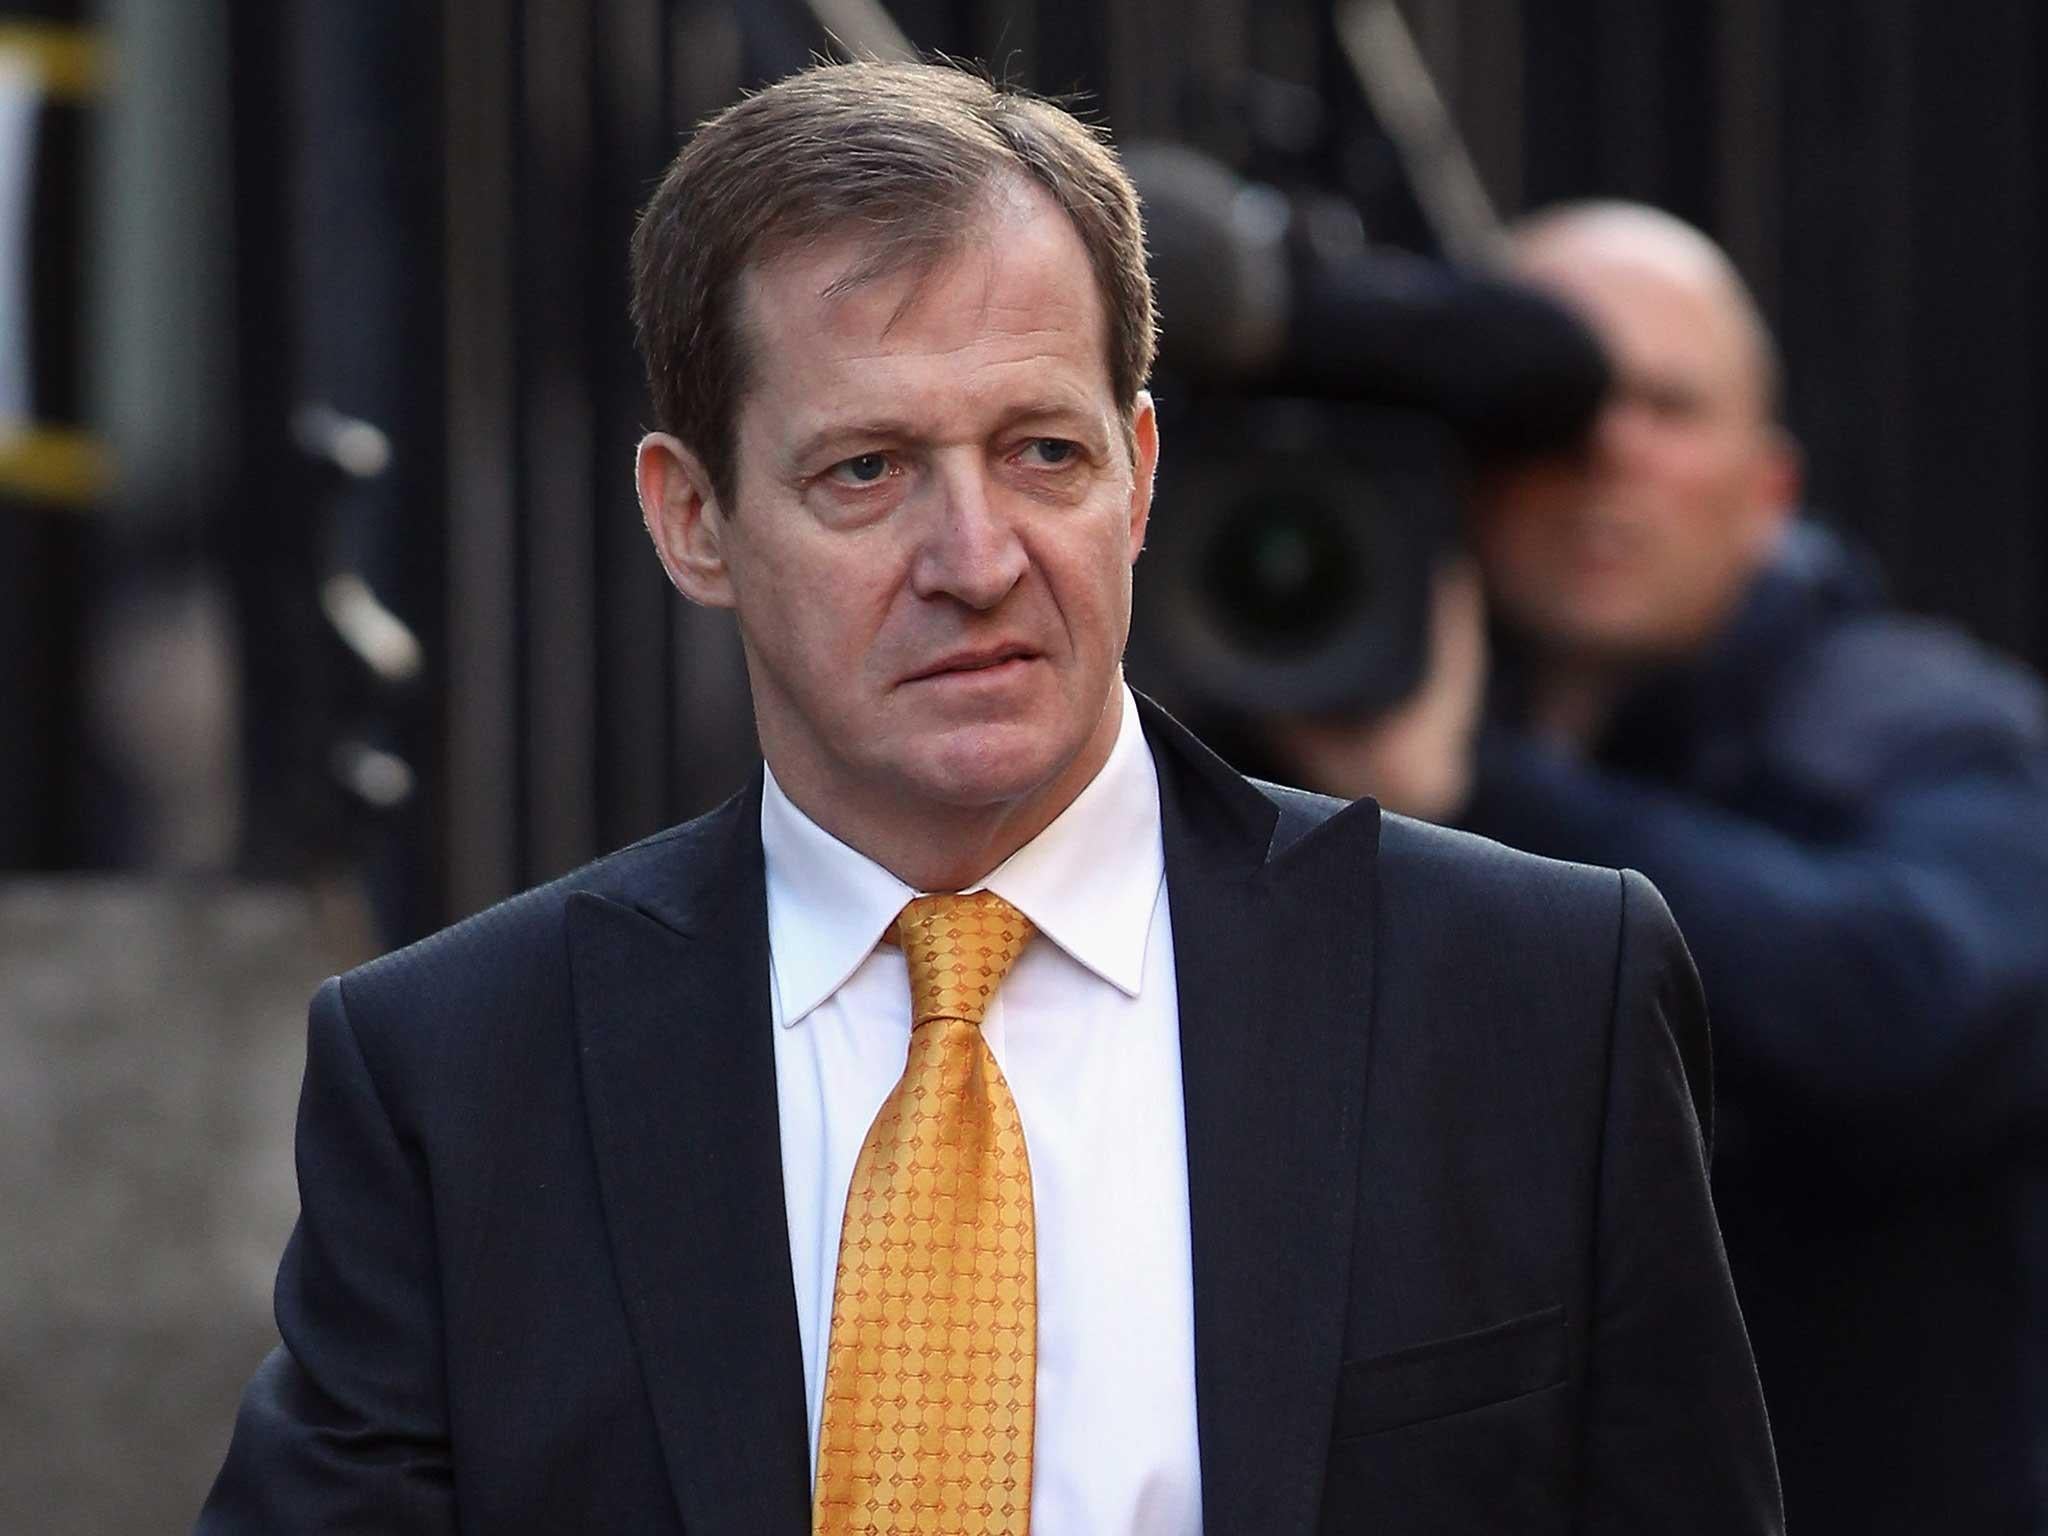 Alastair Campbell was Tony Blair's director of communications and strategy